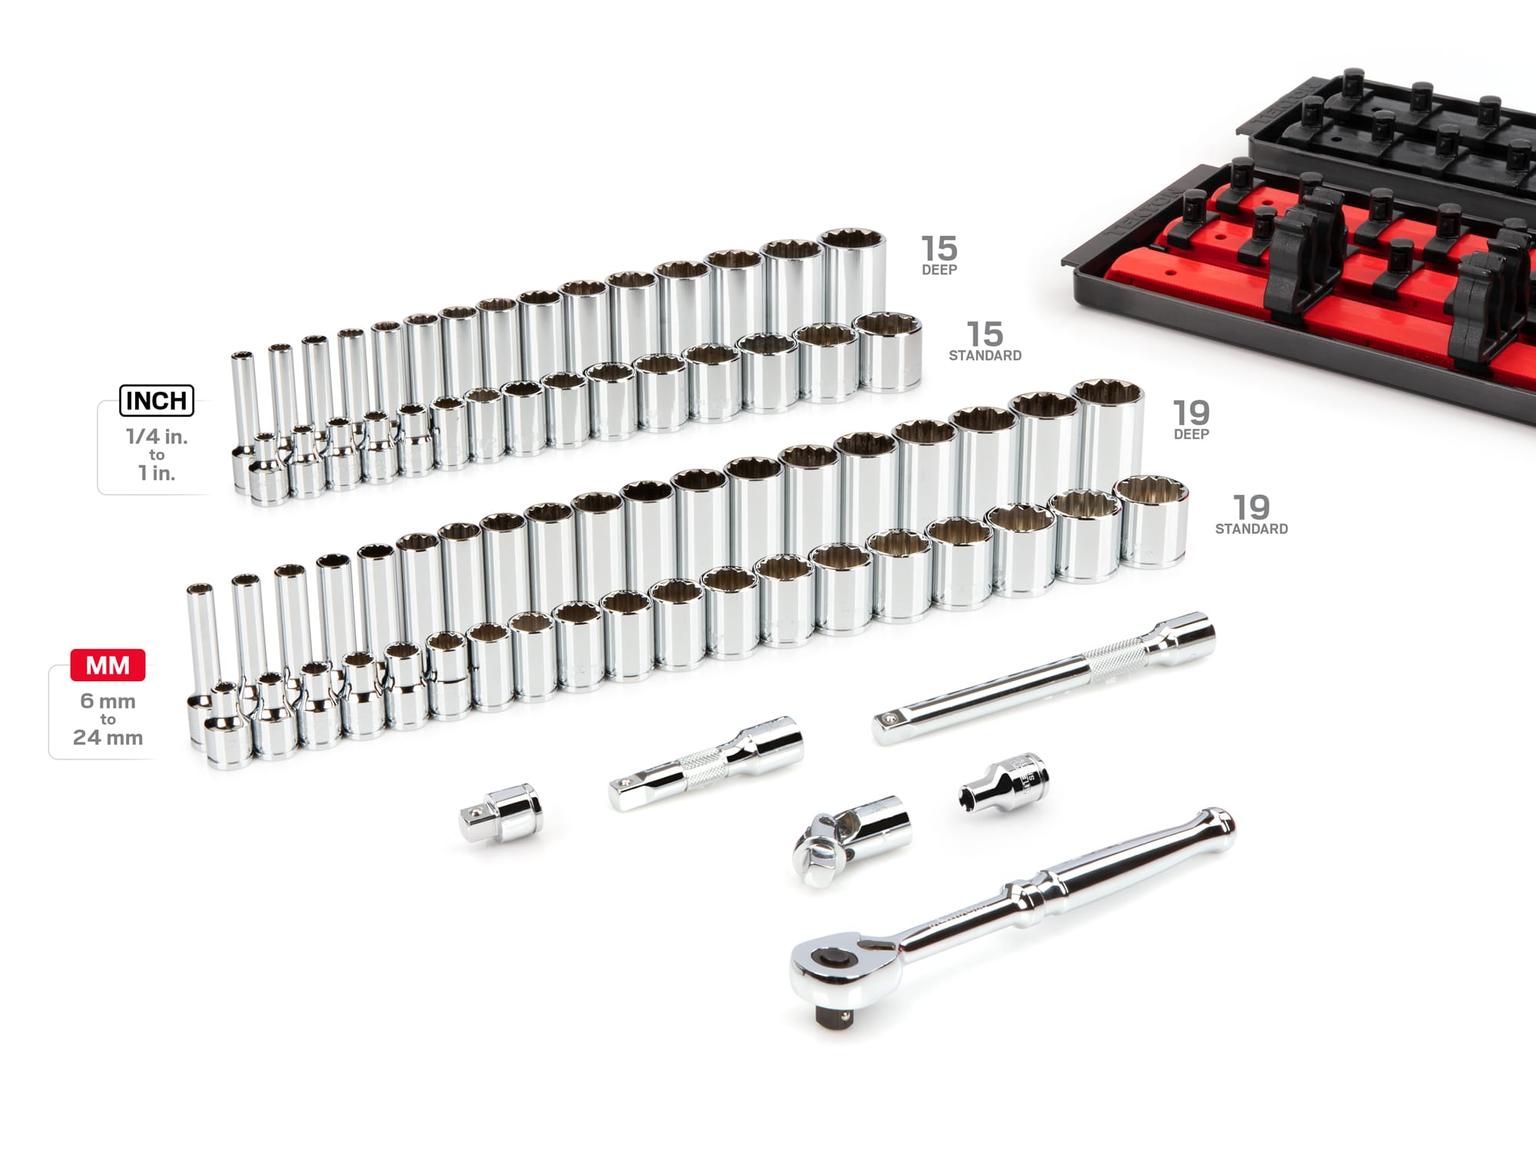 TEKTON SKT13302-T 3/8 Inch Drive 12-Point Socket and Ratchet Set with Rails, 74-Piece (1/4-1 in., 6-24 mm)